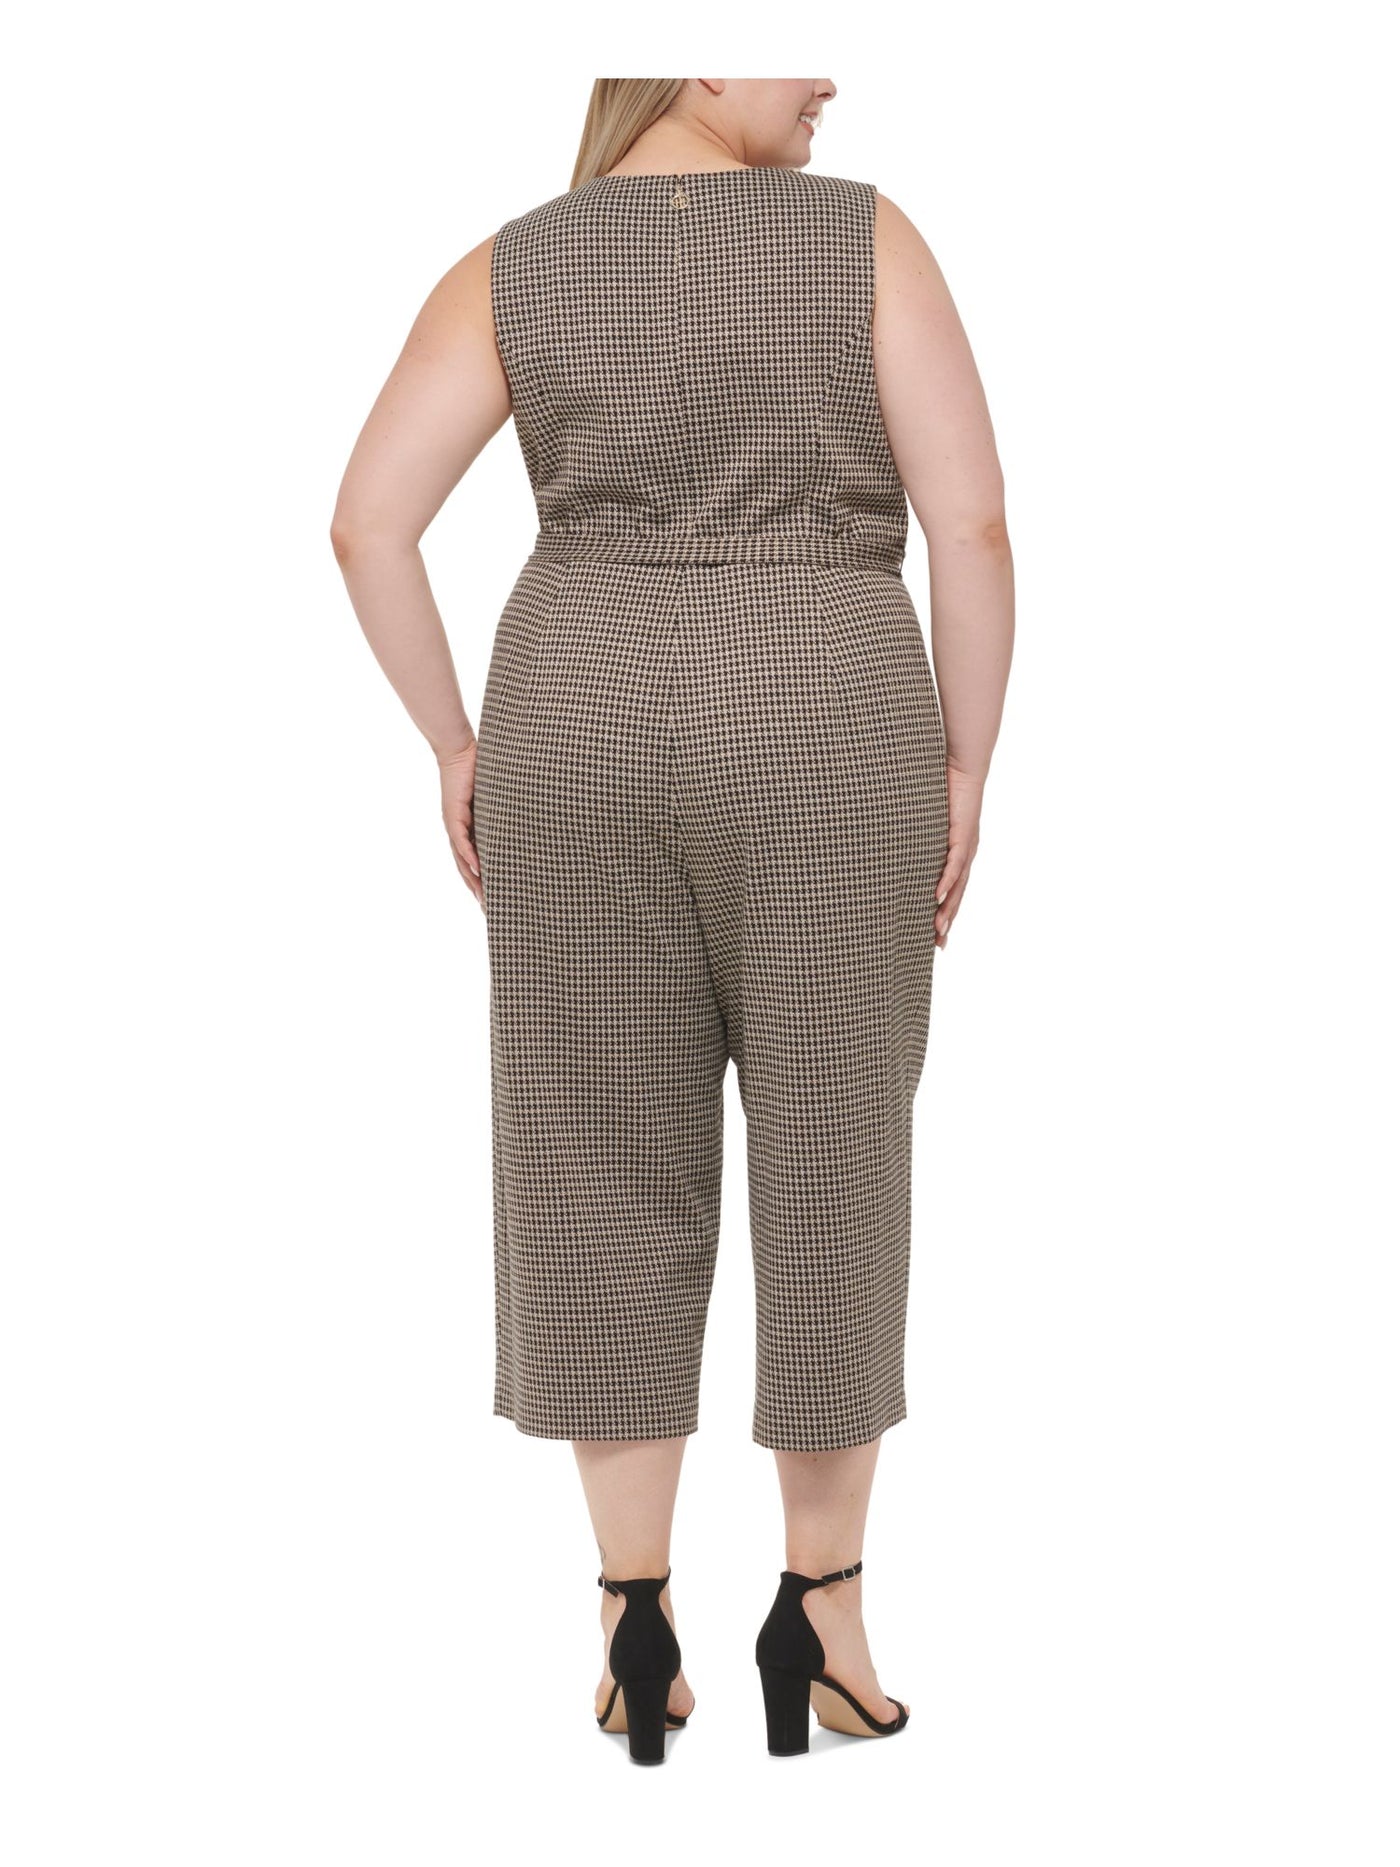 TOMMY HILFIGER Womens Brown Zippered Belted Wide Cropped Leg Houndstooth Sleeveless V Neck Wear To Work High Waist Jumpsuit Plus 16W